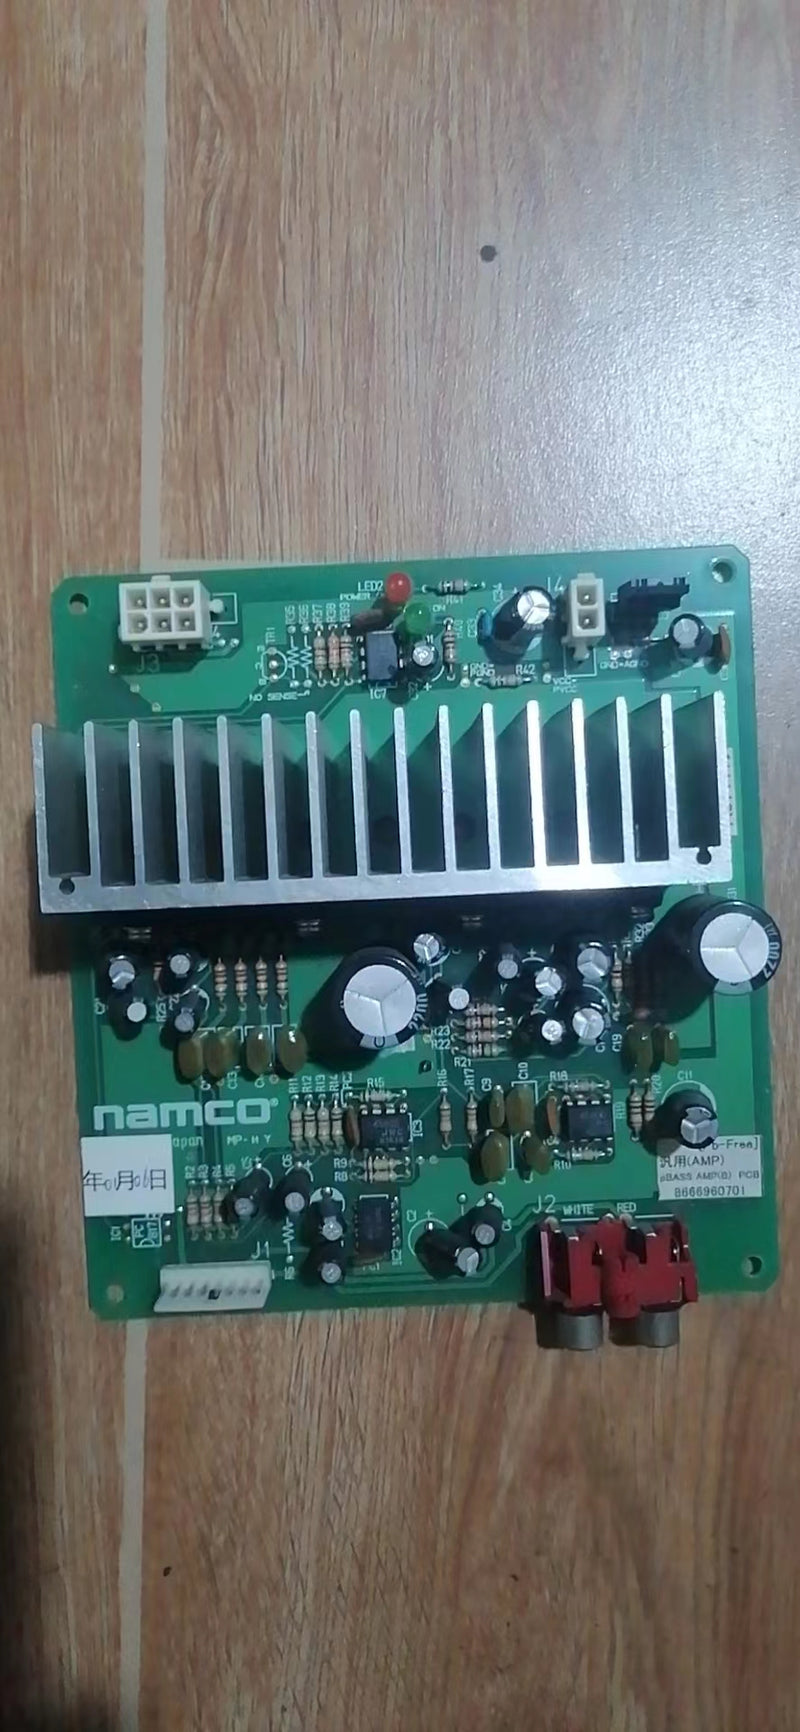 NAMCO   Bass Amp pcb 8666960701 .TESTED WORKING